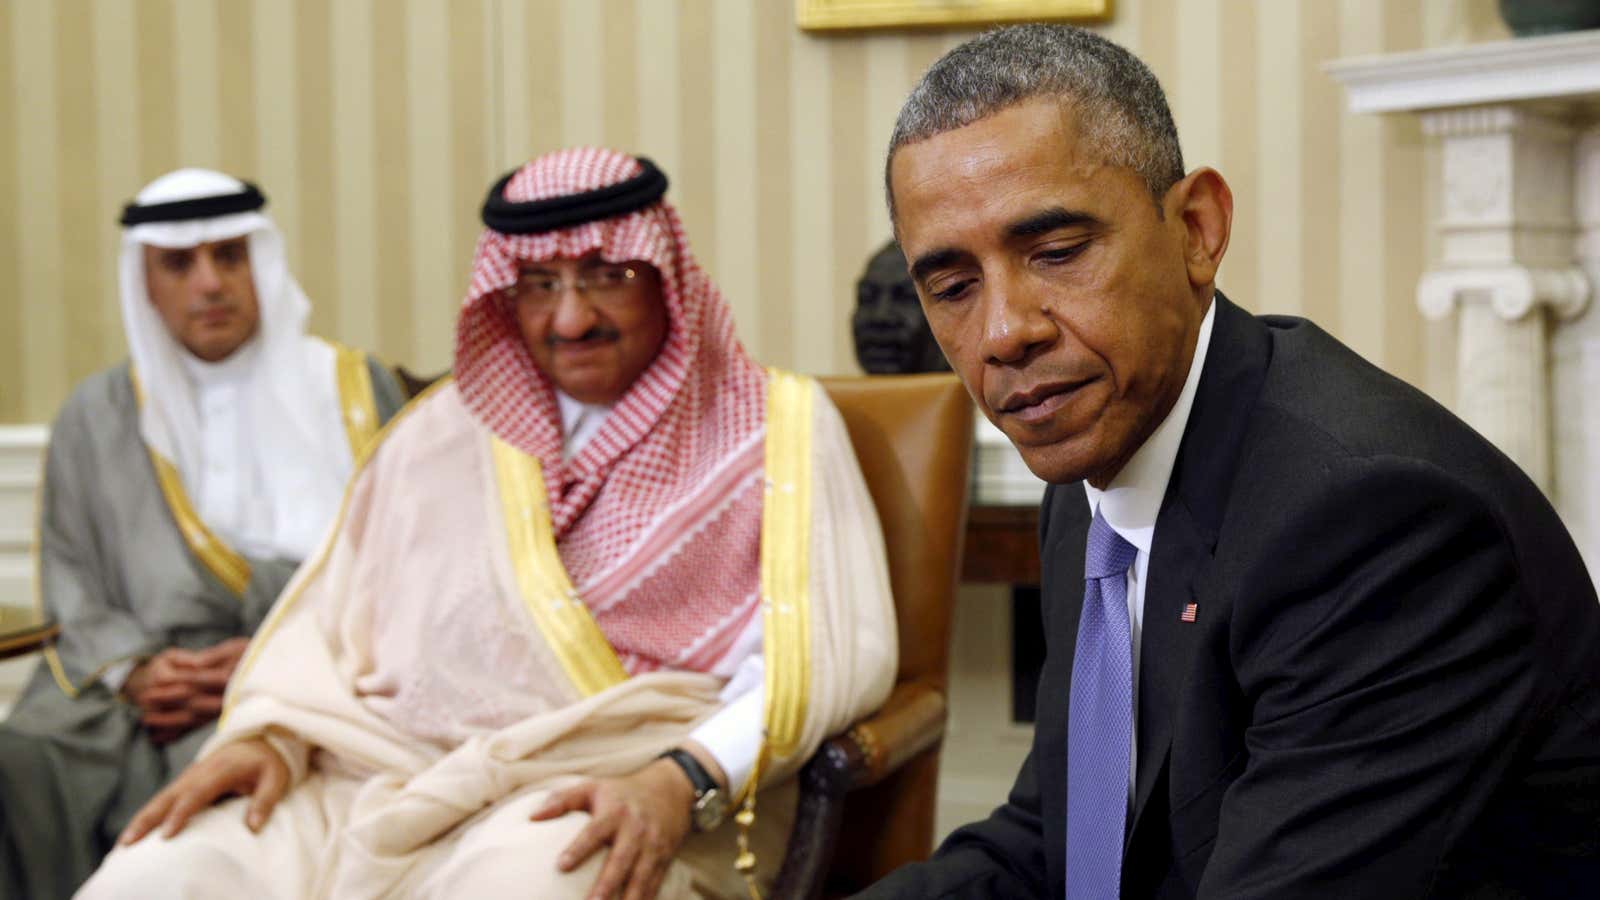 Obama meets with Saudi Crown Prince Mohammed bin Nayef (C) in the Oval Office.